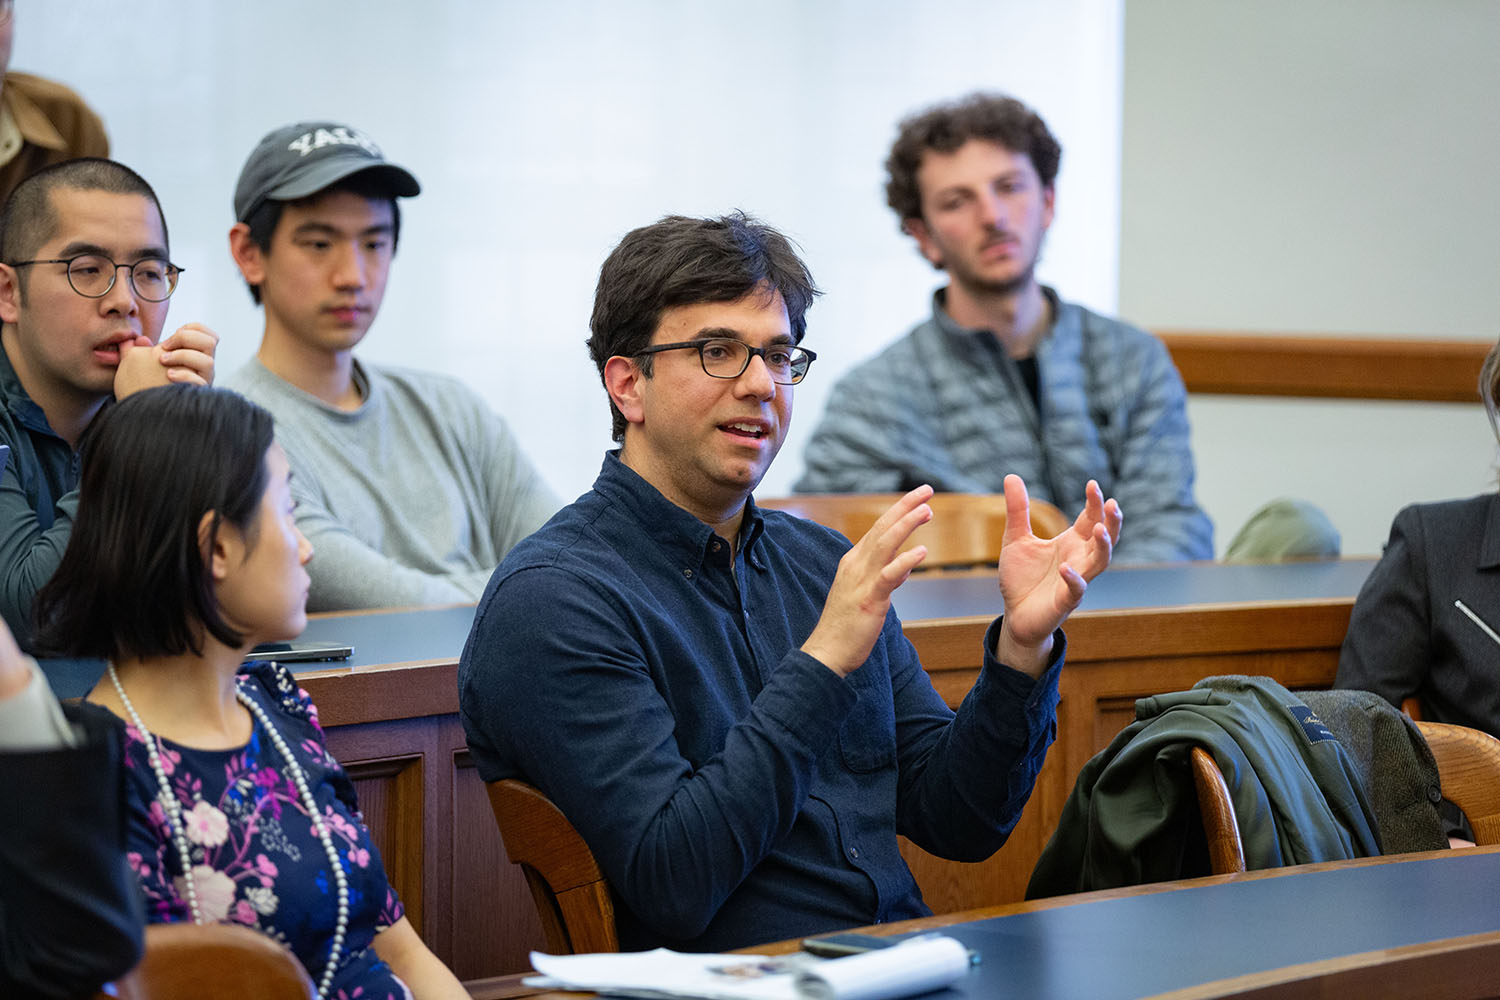 YLS Prof. and Center Co-Dir. Sarath Sanga &#039;14 (right) asking a question, while Center Exec. Dir. Nancy Liao &#039;05 (left) listens